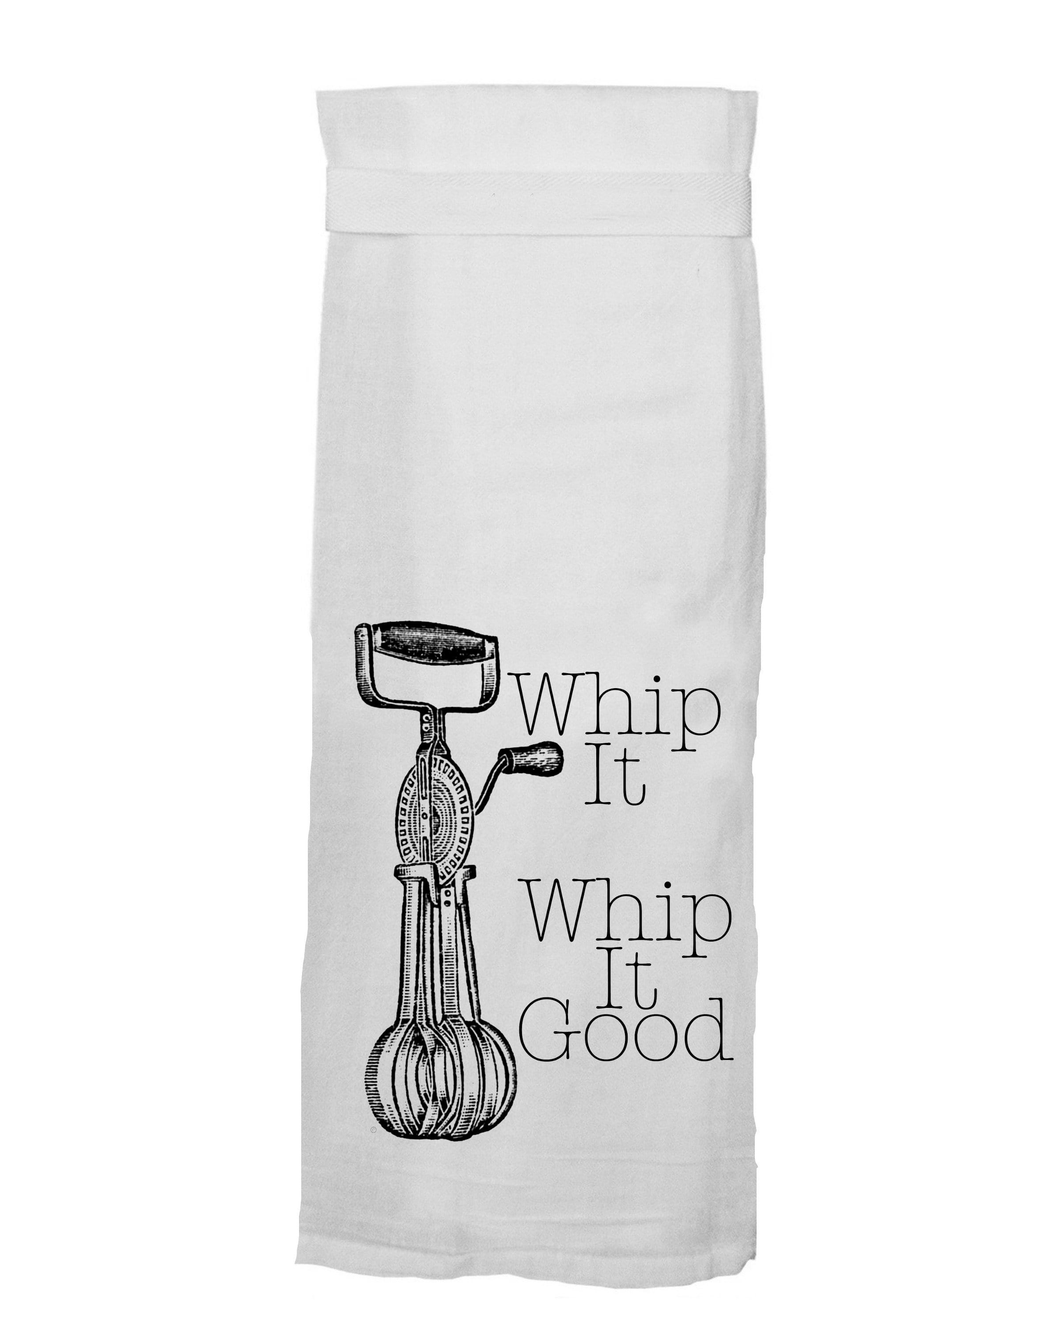 Whip It, Whip It Good Flour Sack Hang Tight Towel